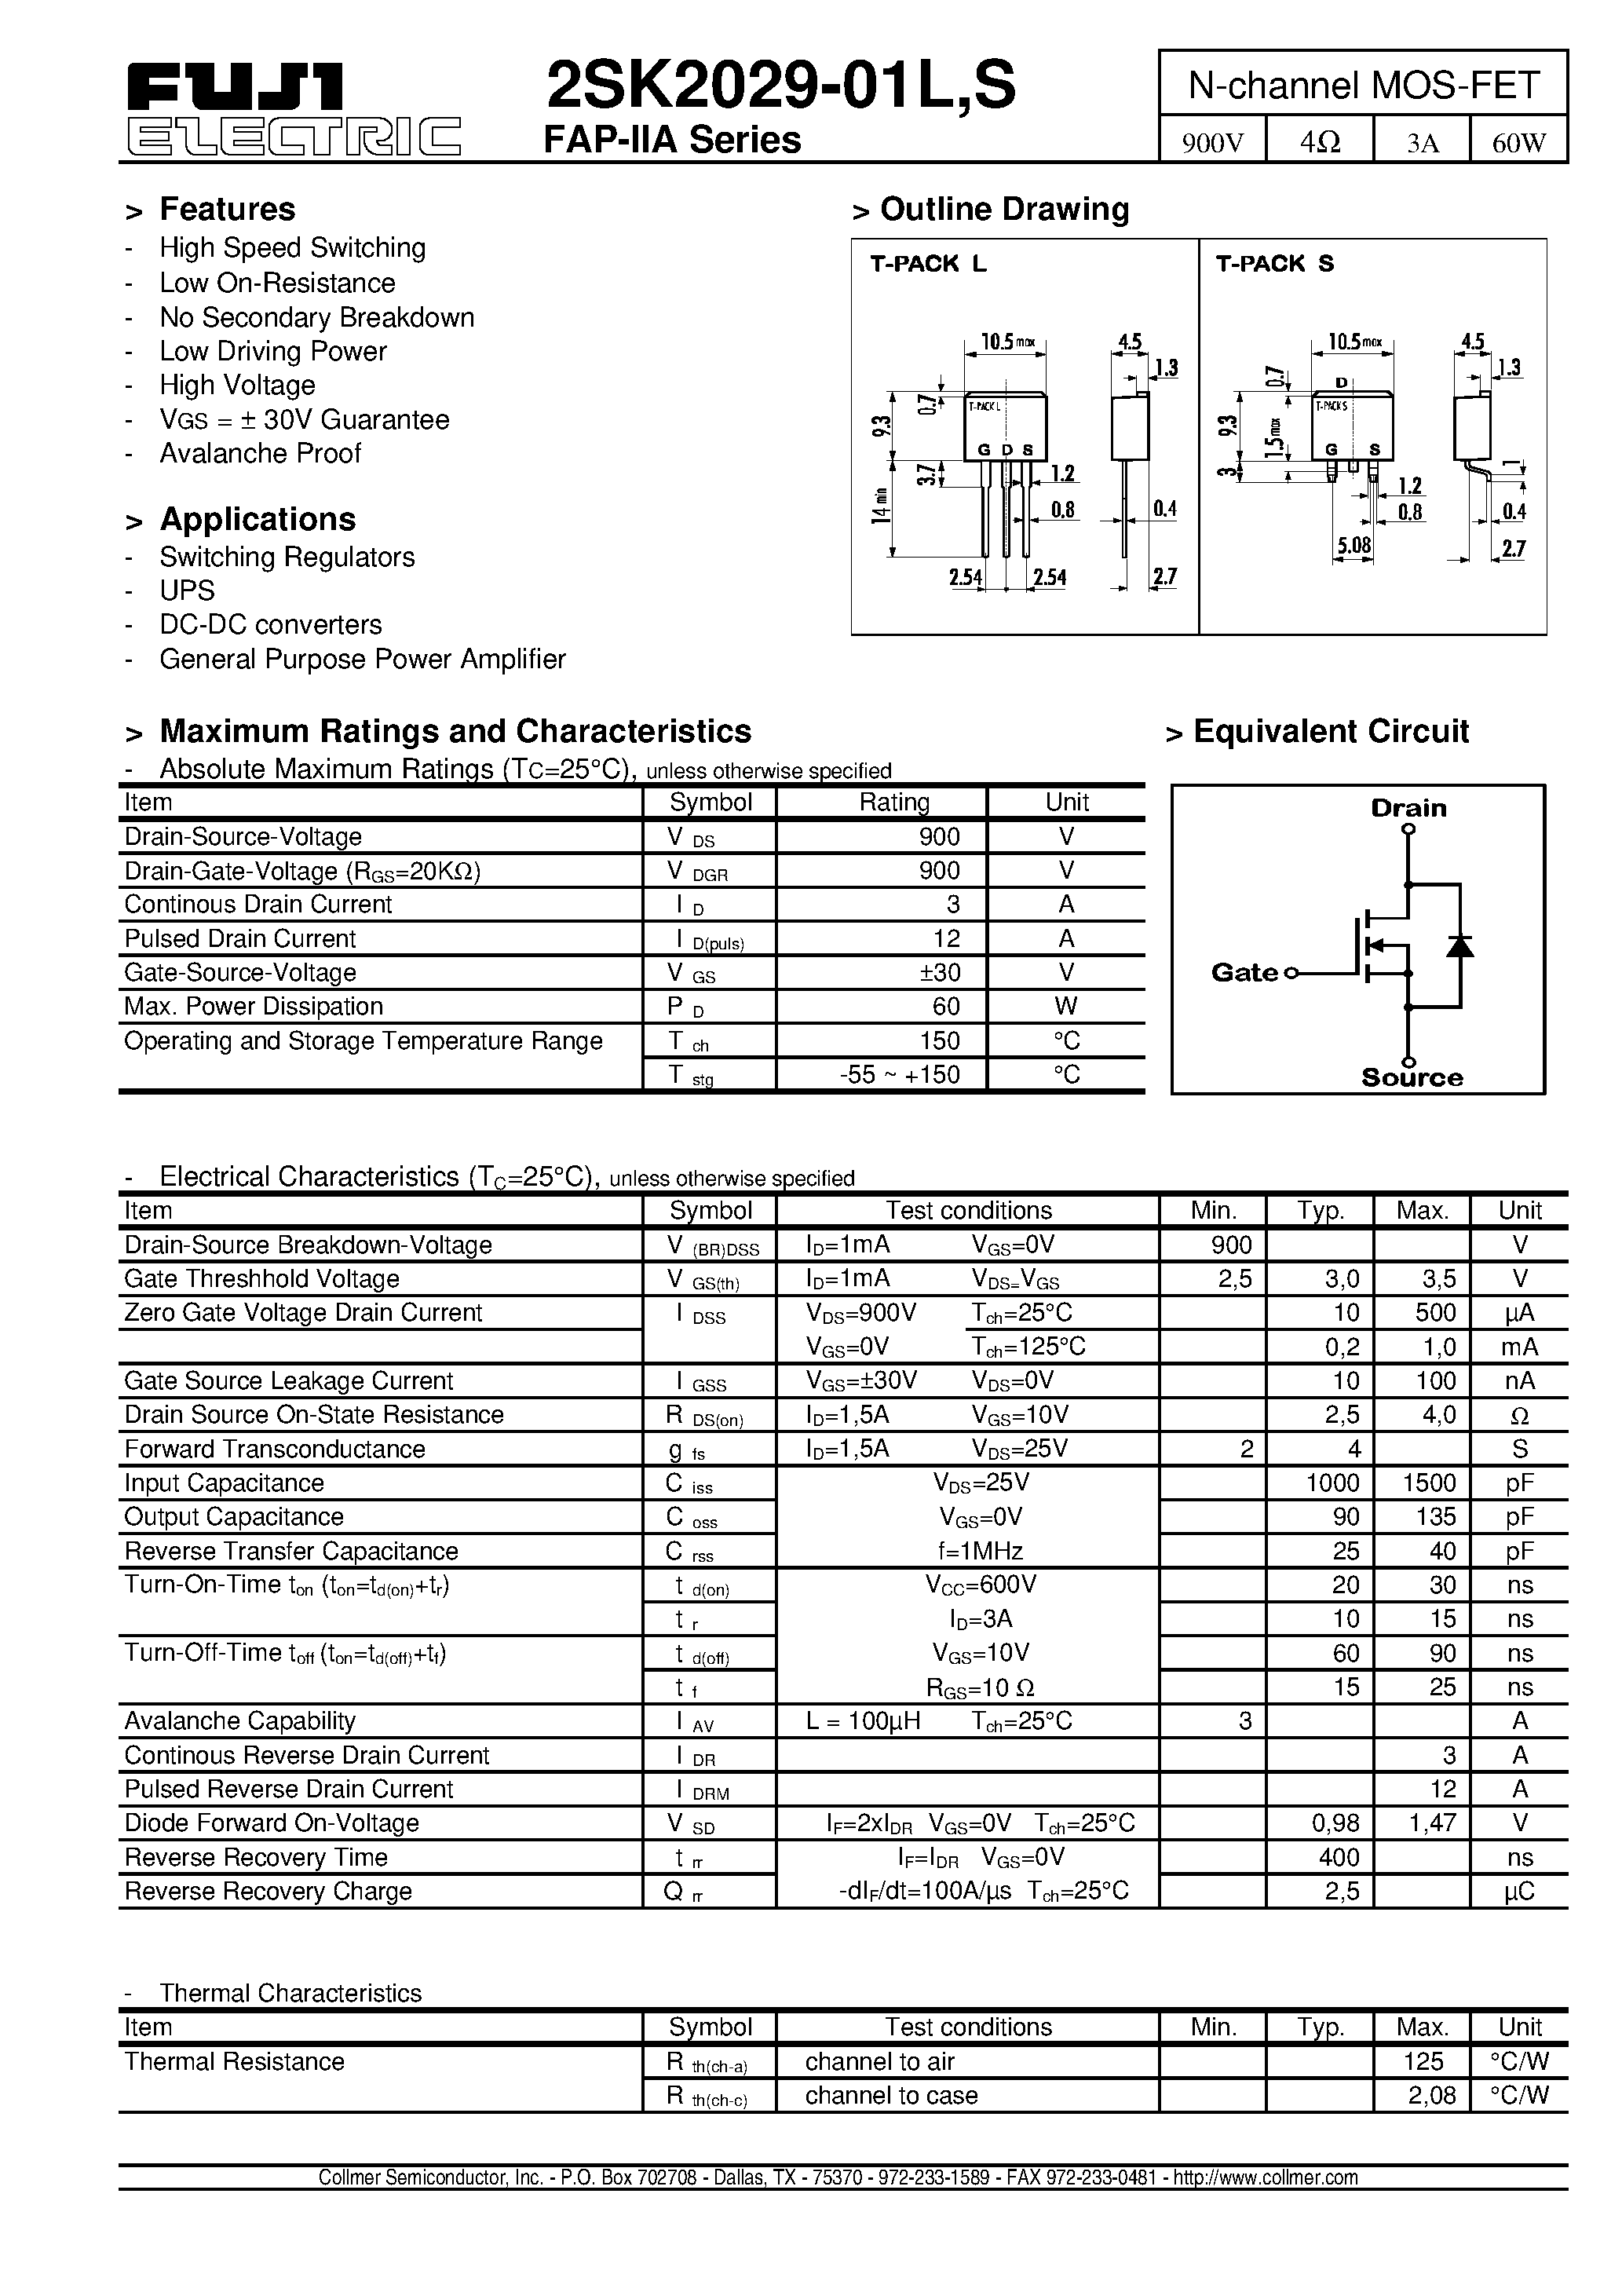 Datasheet 2SK2029-01L - N-channel MOS-FET page 1